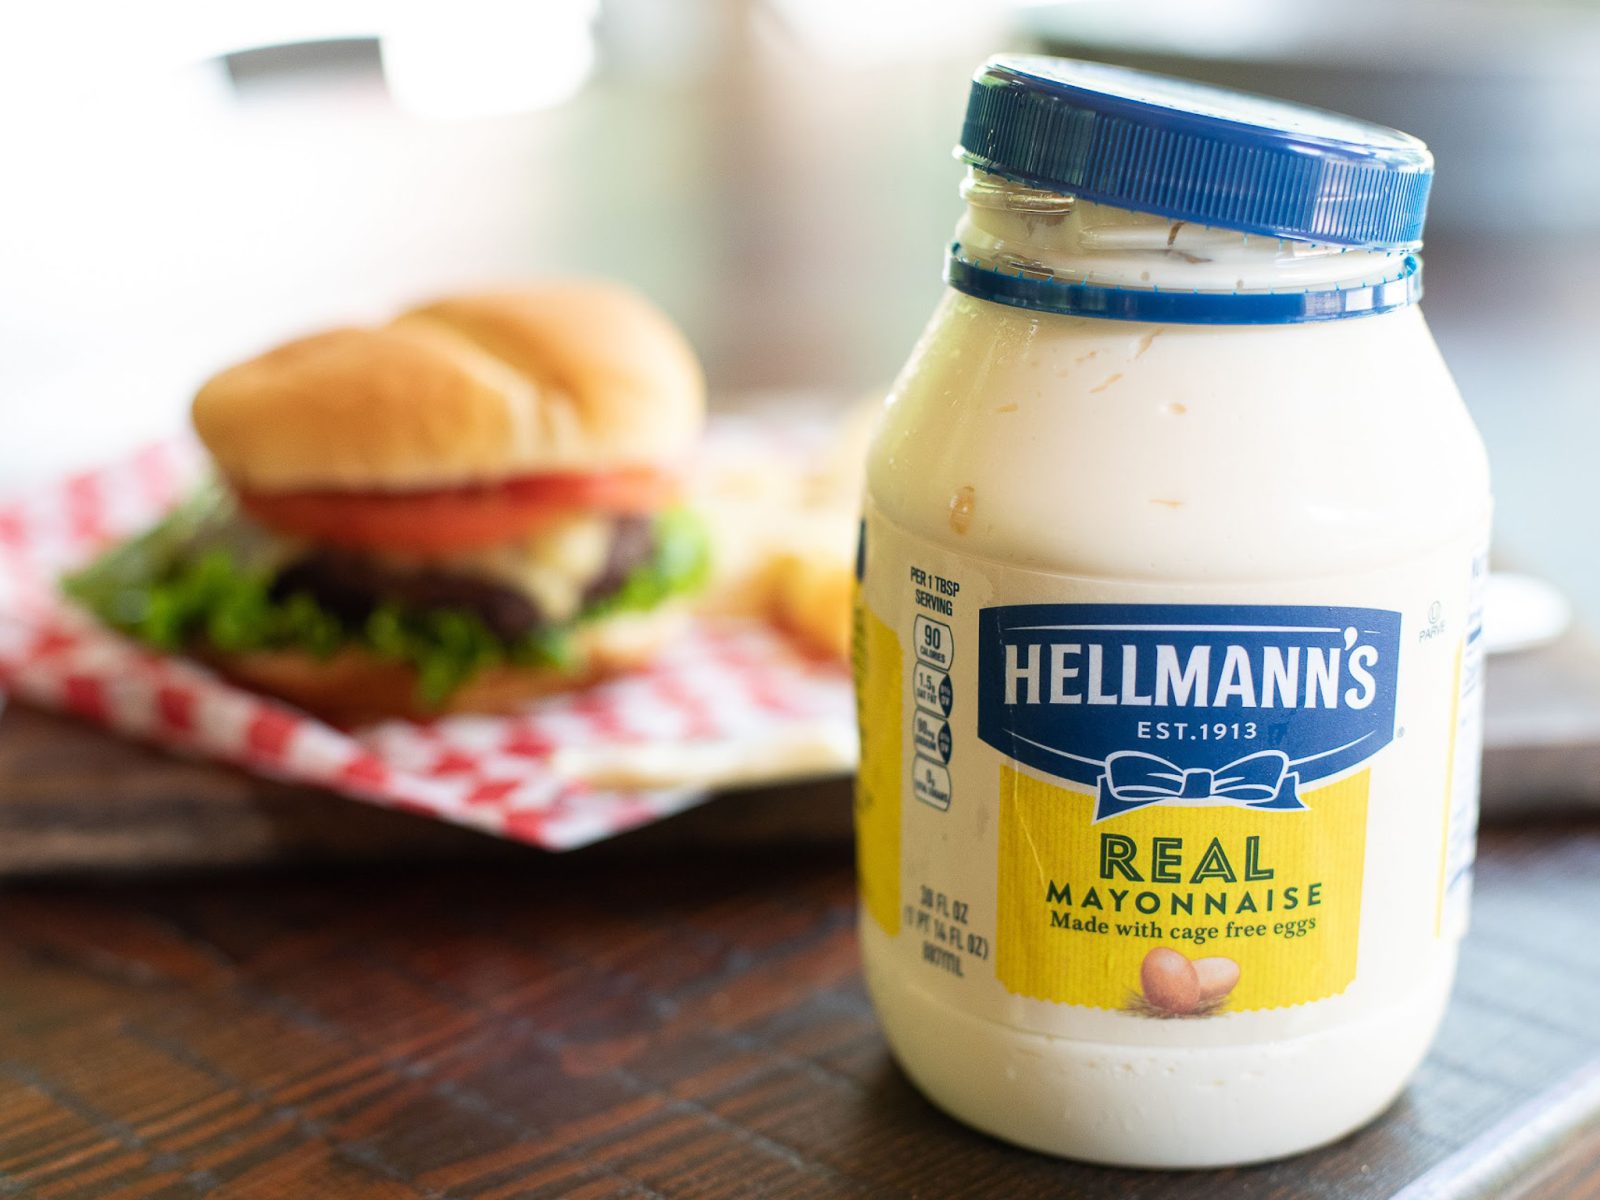 Don’t Miss Your Chance To Get Hellmann’s Mayonnaise While It’s Buy One Get One FREE At Publix